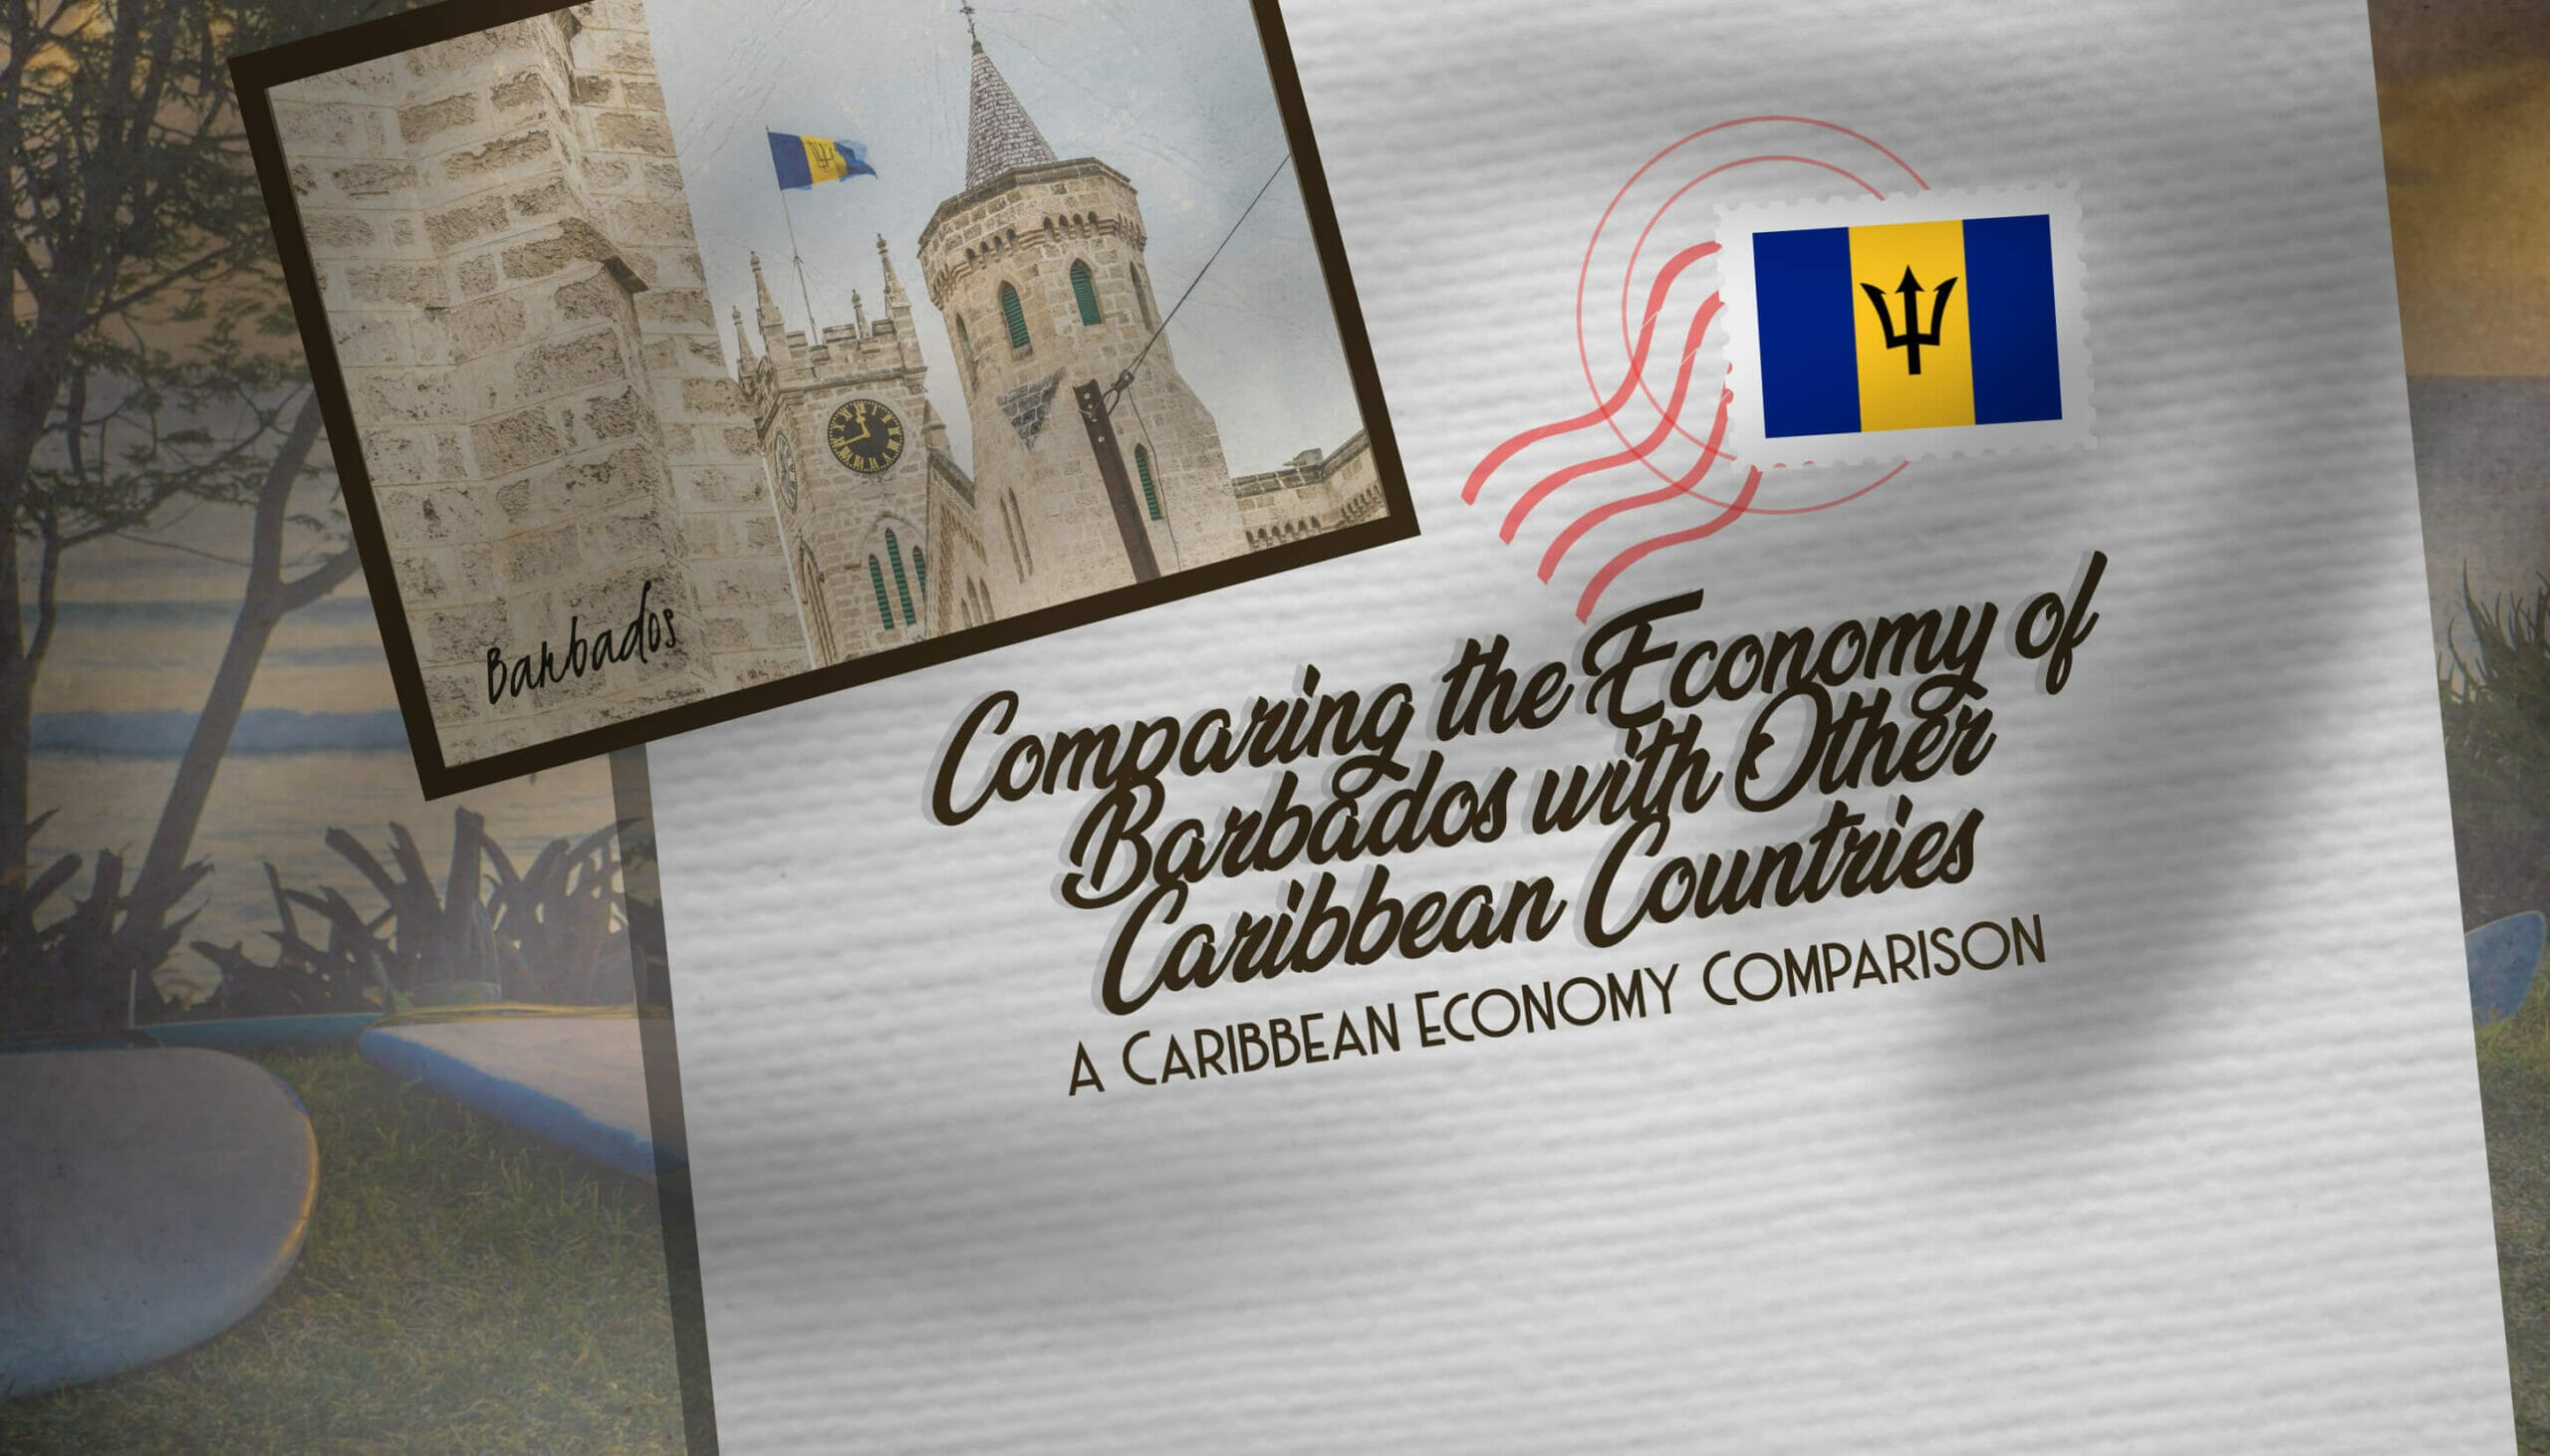 Comparing the Economy of Barbados with Other Caribbean Countries